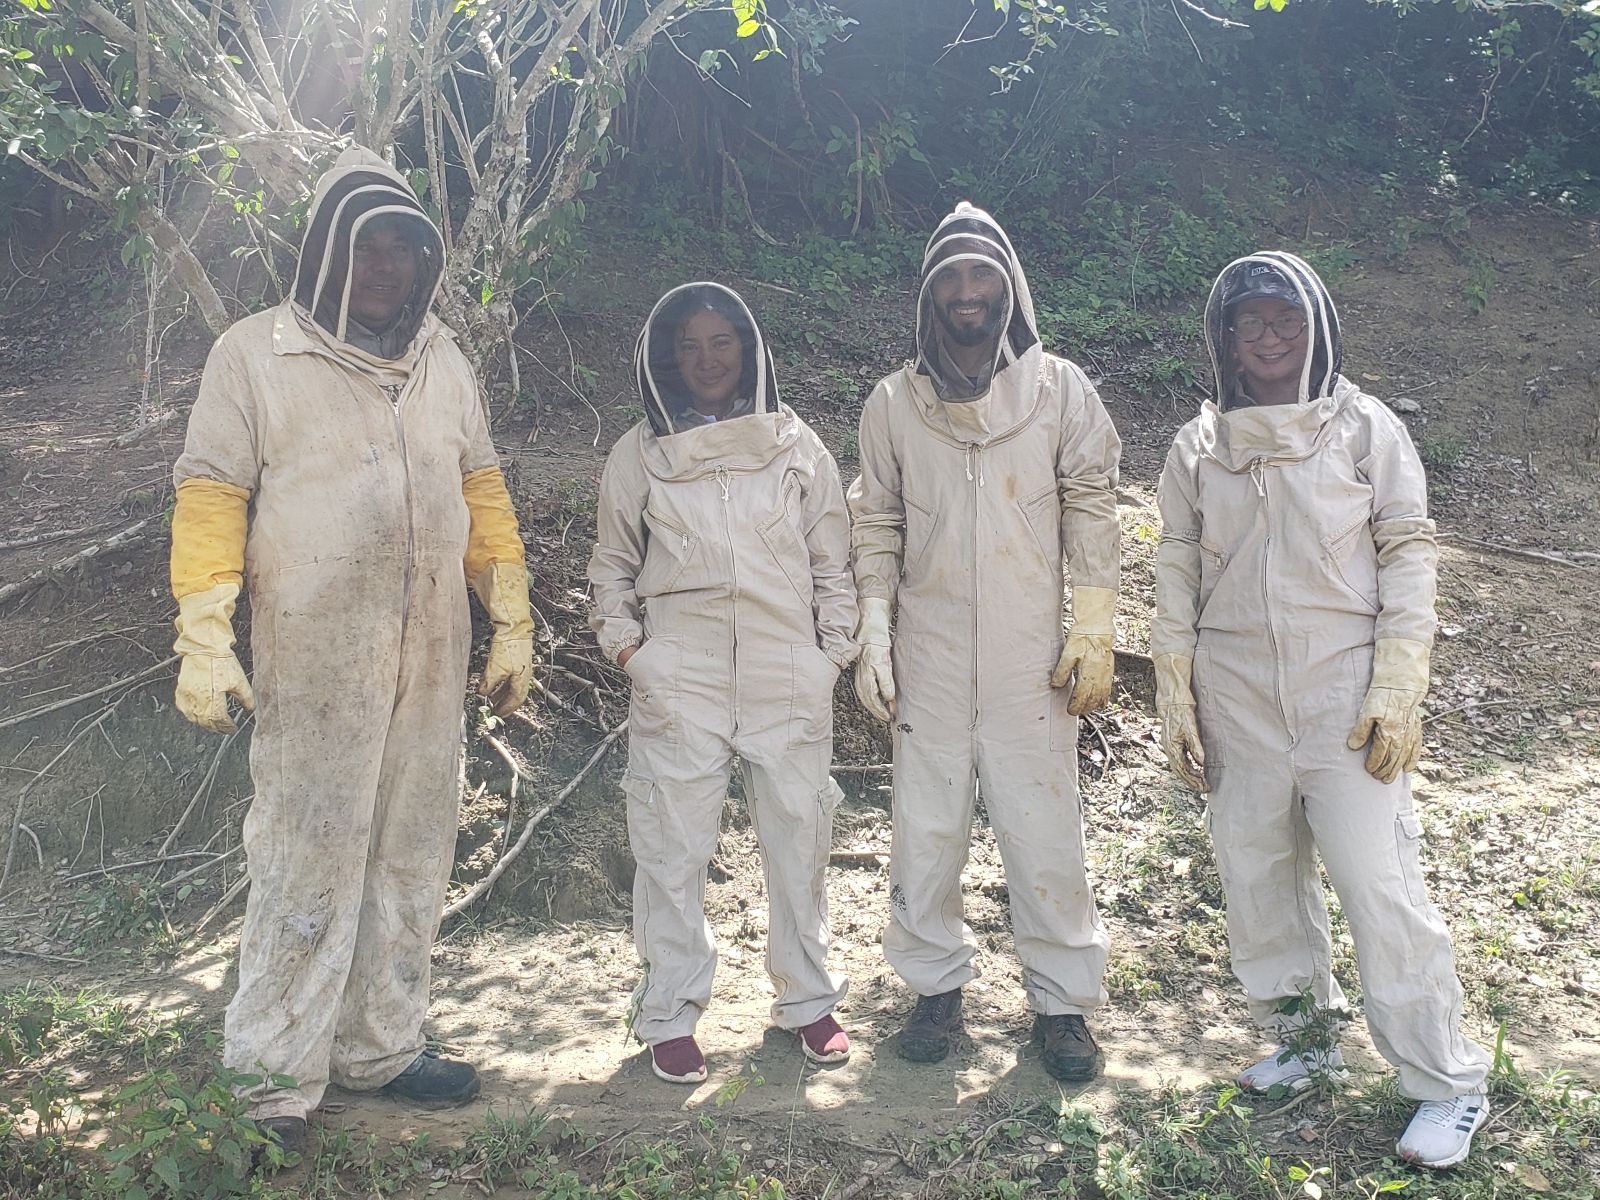 Two young leaders in Montes de Maria, who manage the apiculture project that provides economic opportunities, are seen with ConsultIPA team members Camilo Rodriguez and Luisa Mazora (IPA Colombia/Jorge Forero)